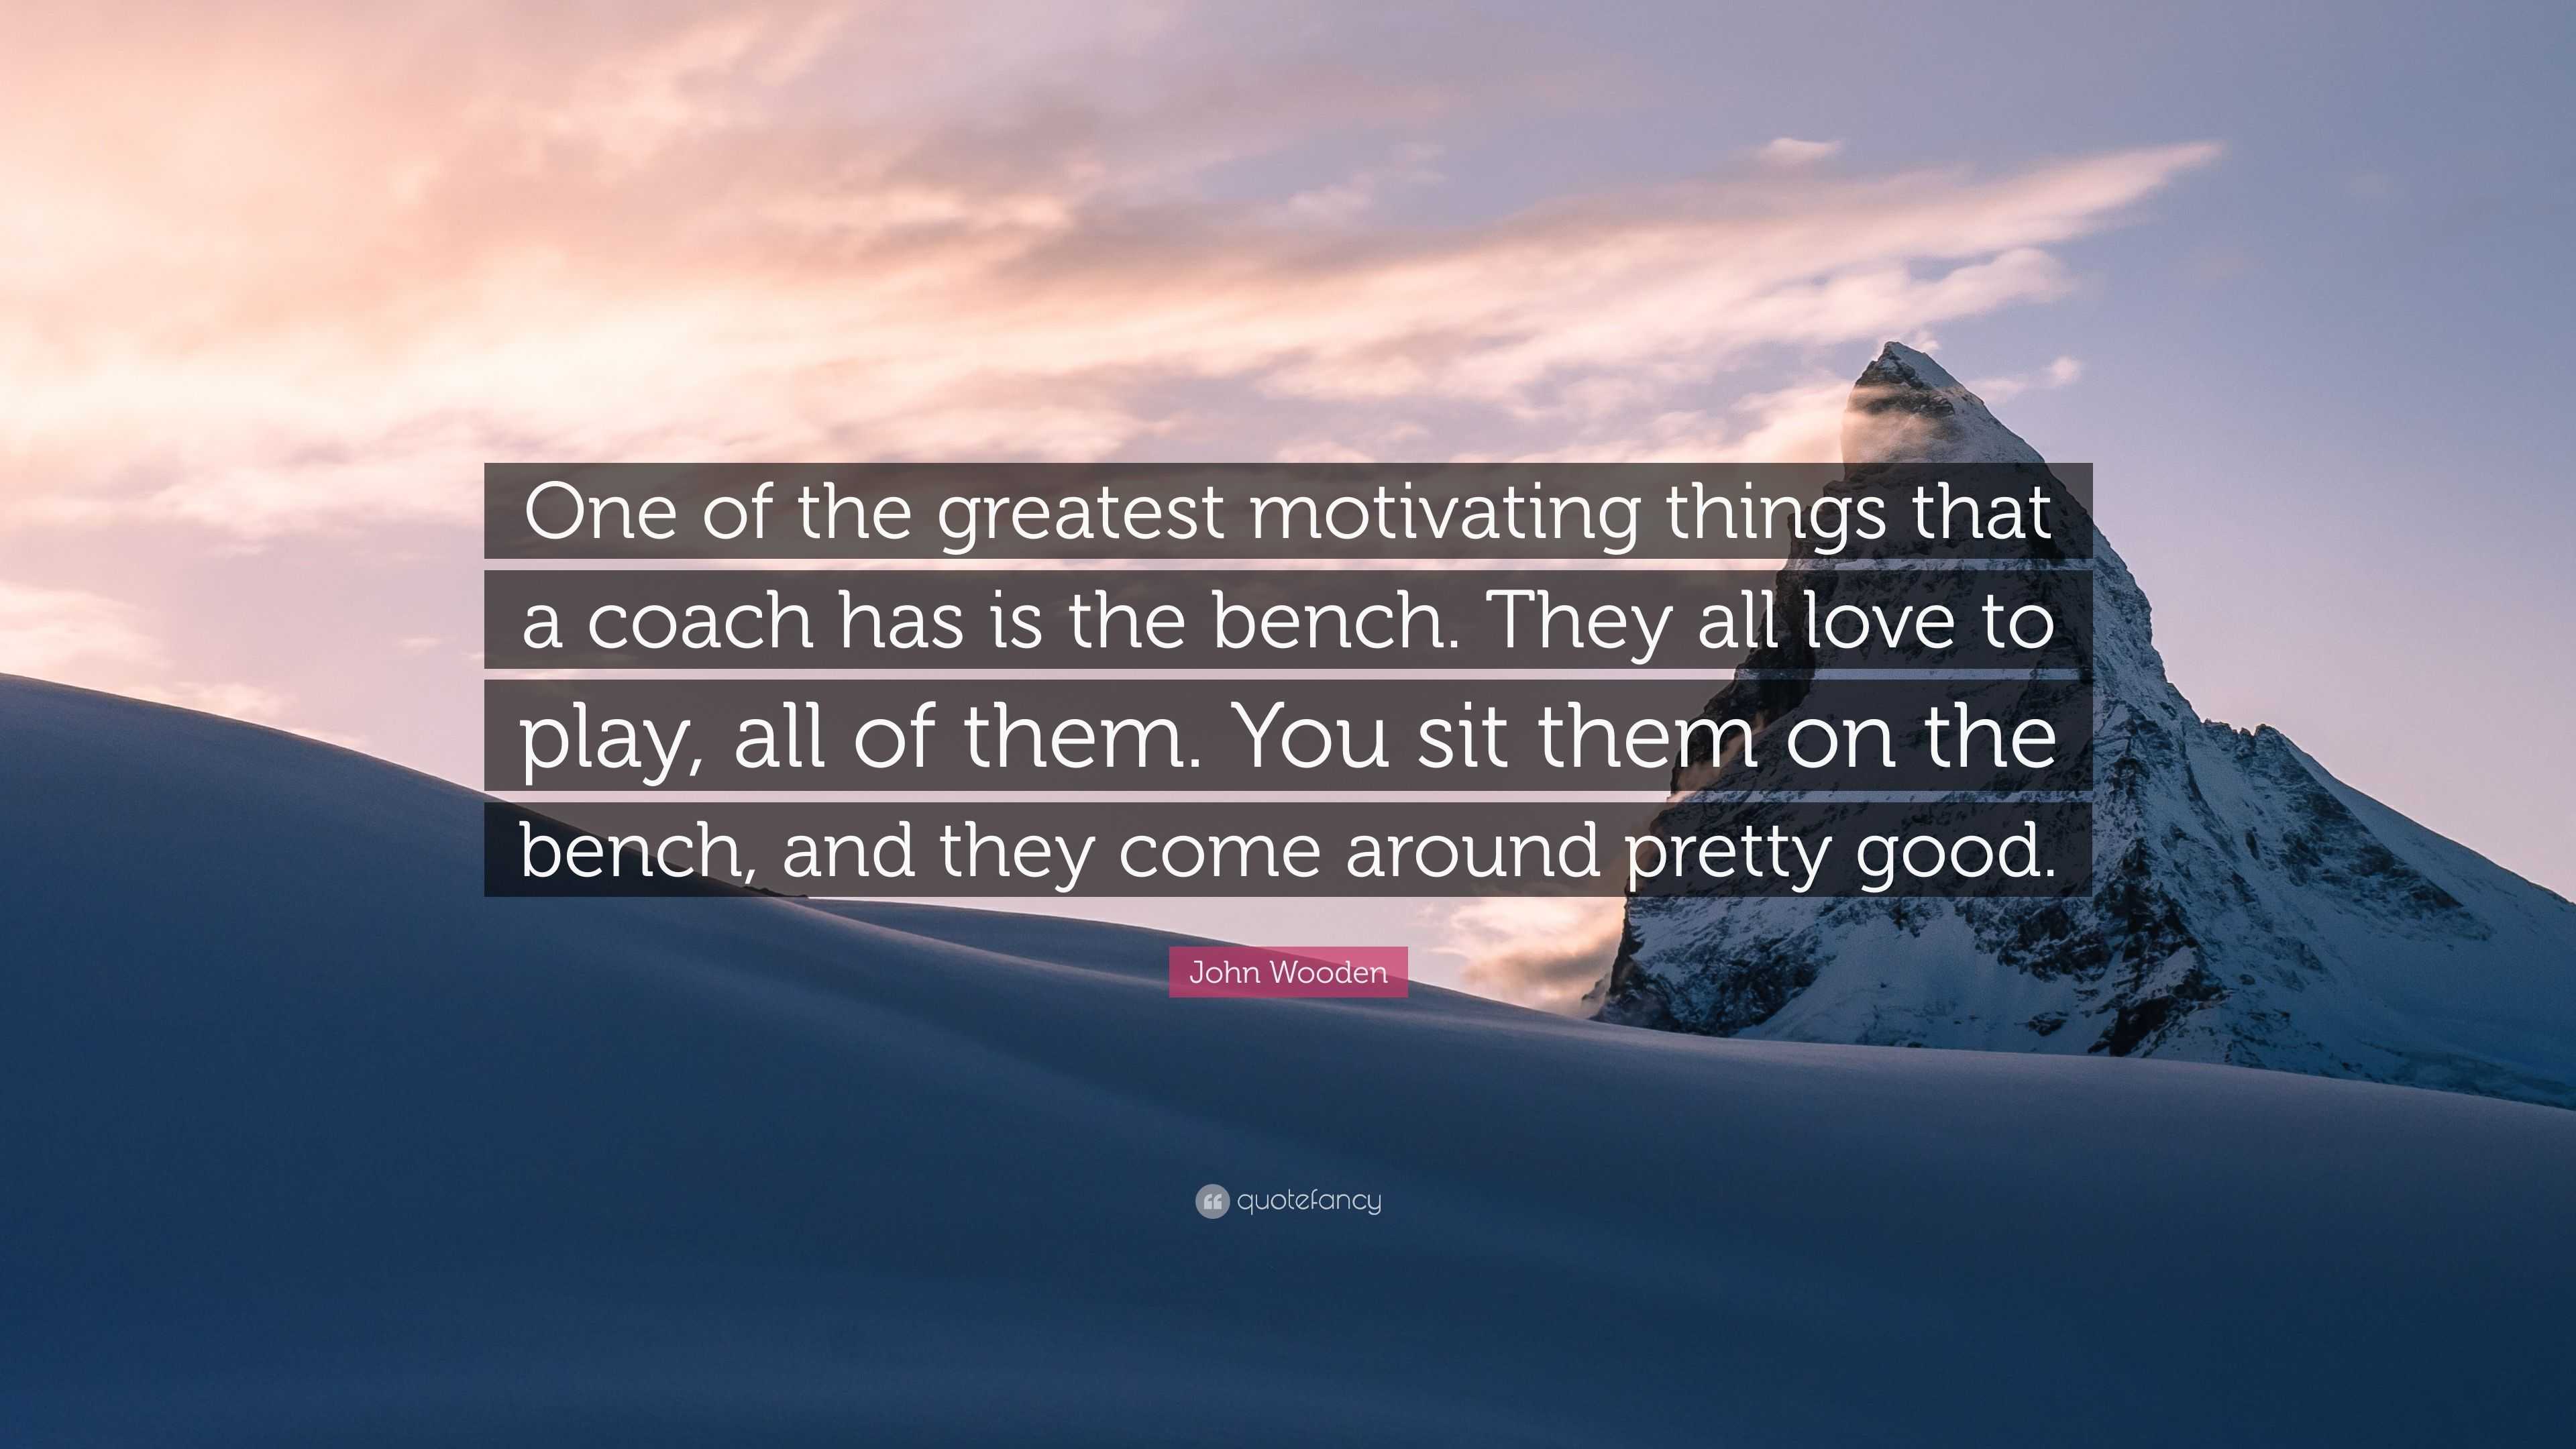 John Wooden Quote: “One of the greatest motivating things that a coach